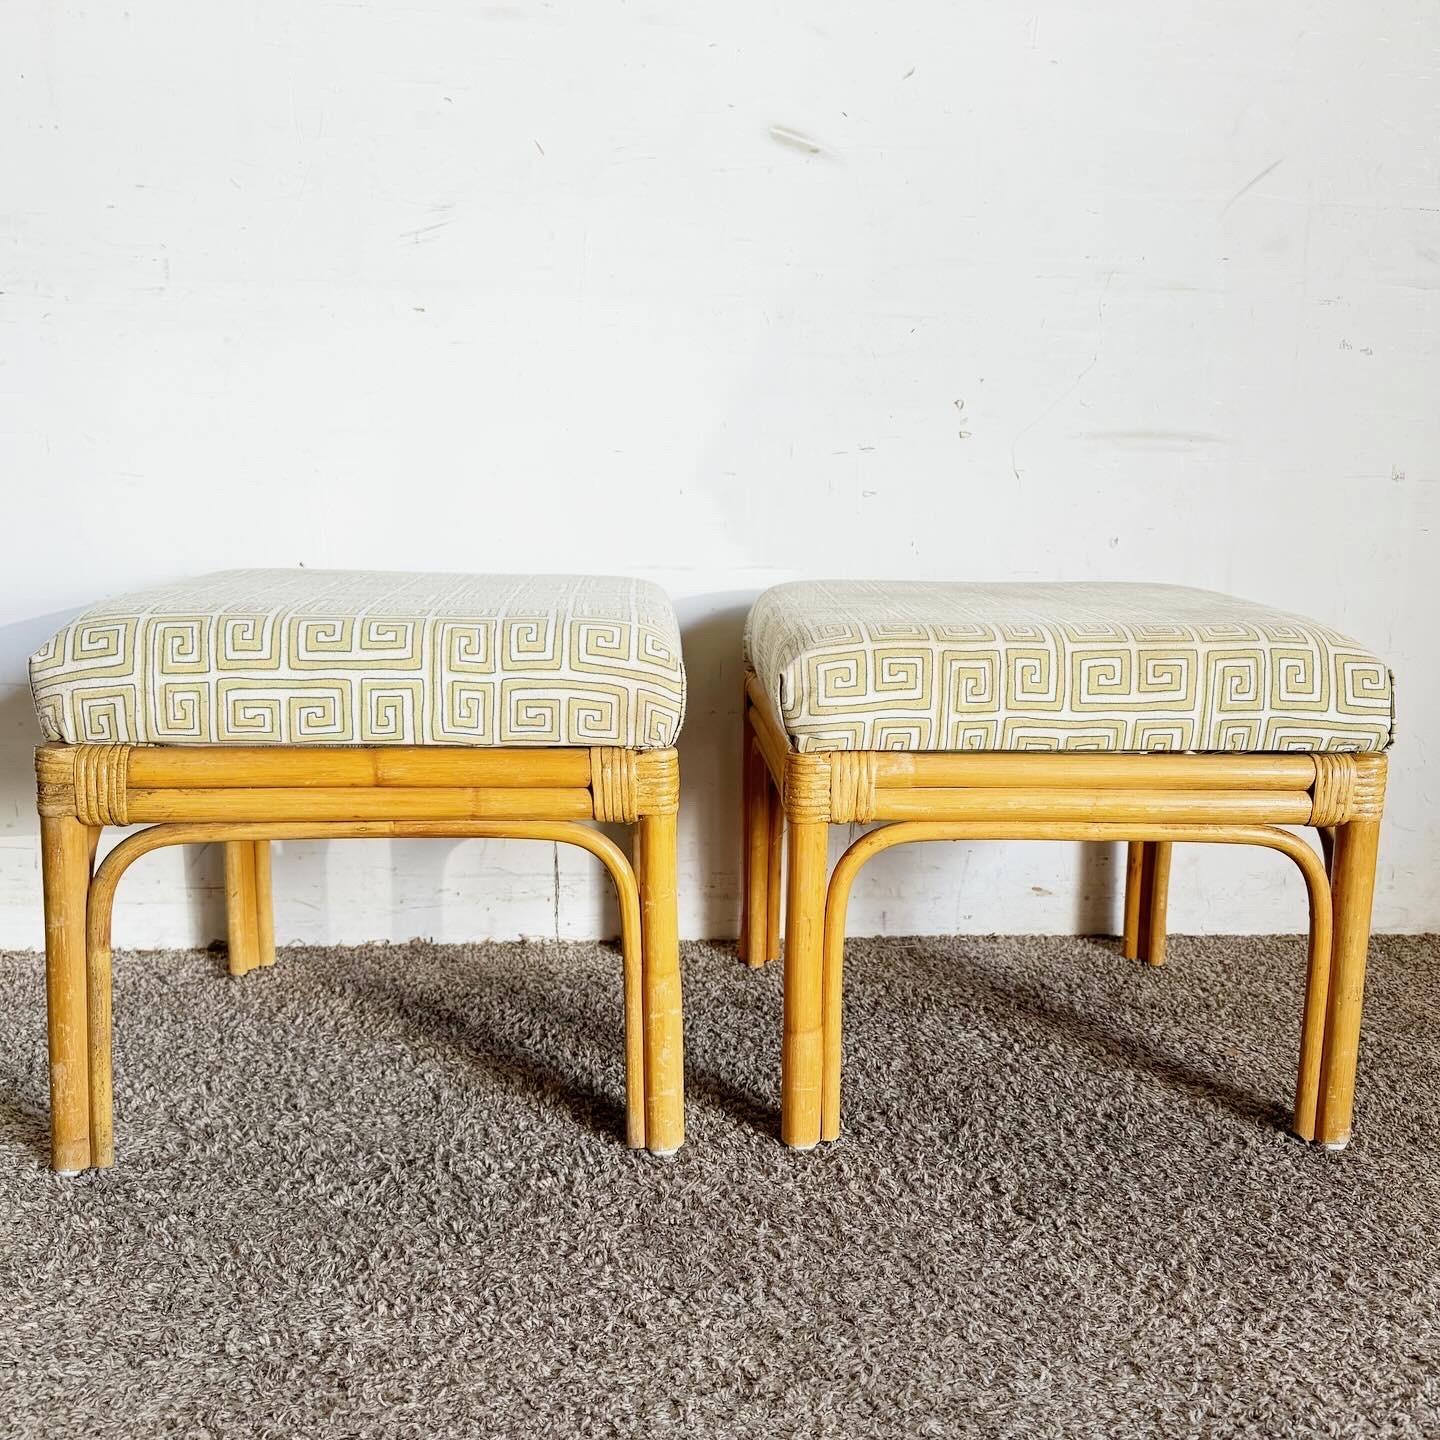 Boho Chic Bamboo Rattan Square Top Ottomans/Low Stools - a Pair For Sale 1